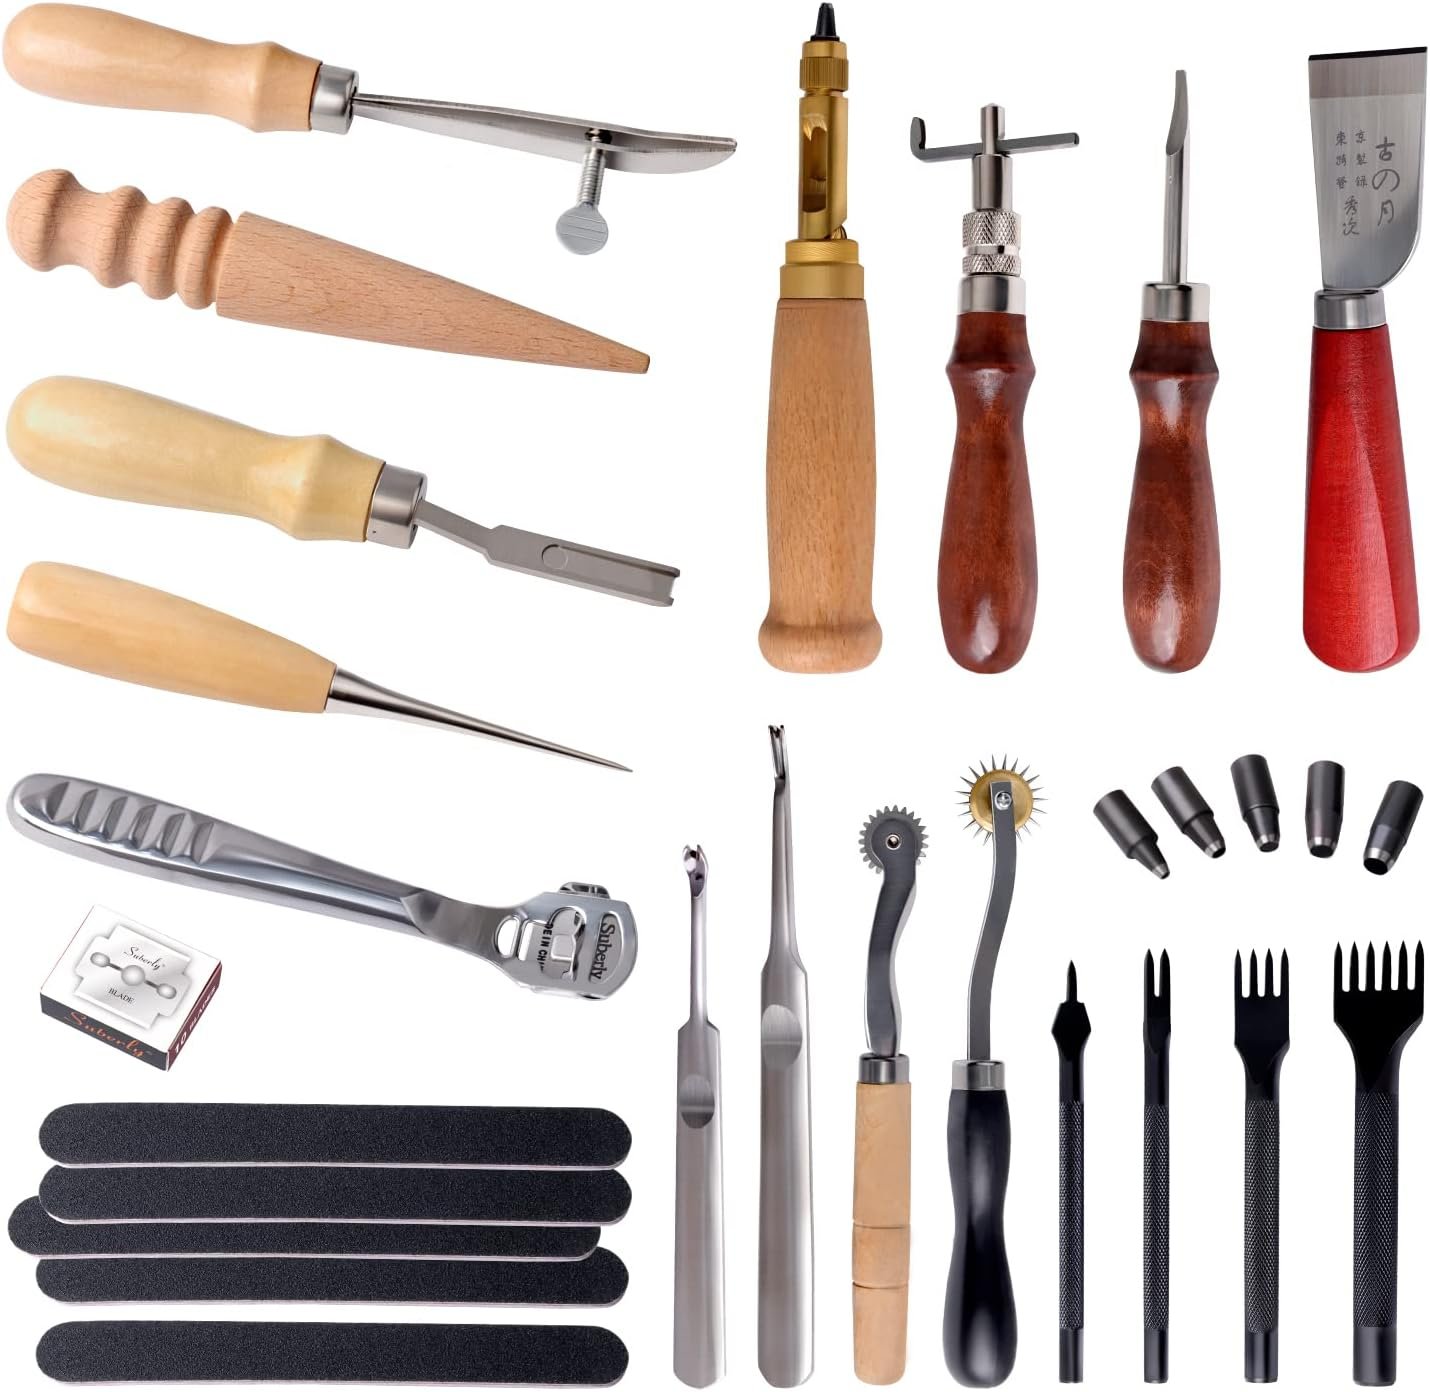 Knoweasy 18-Piece Leather Craft Tools Kit Review